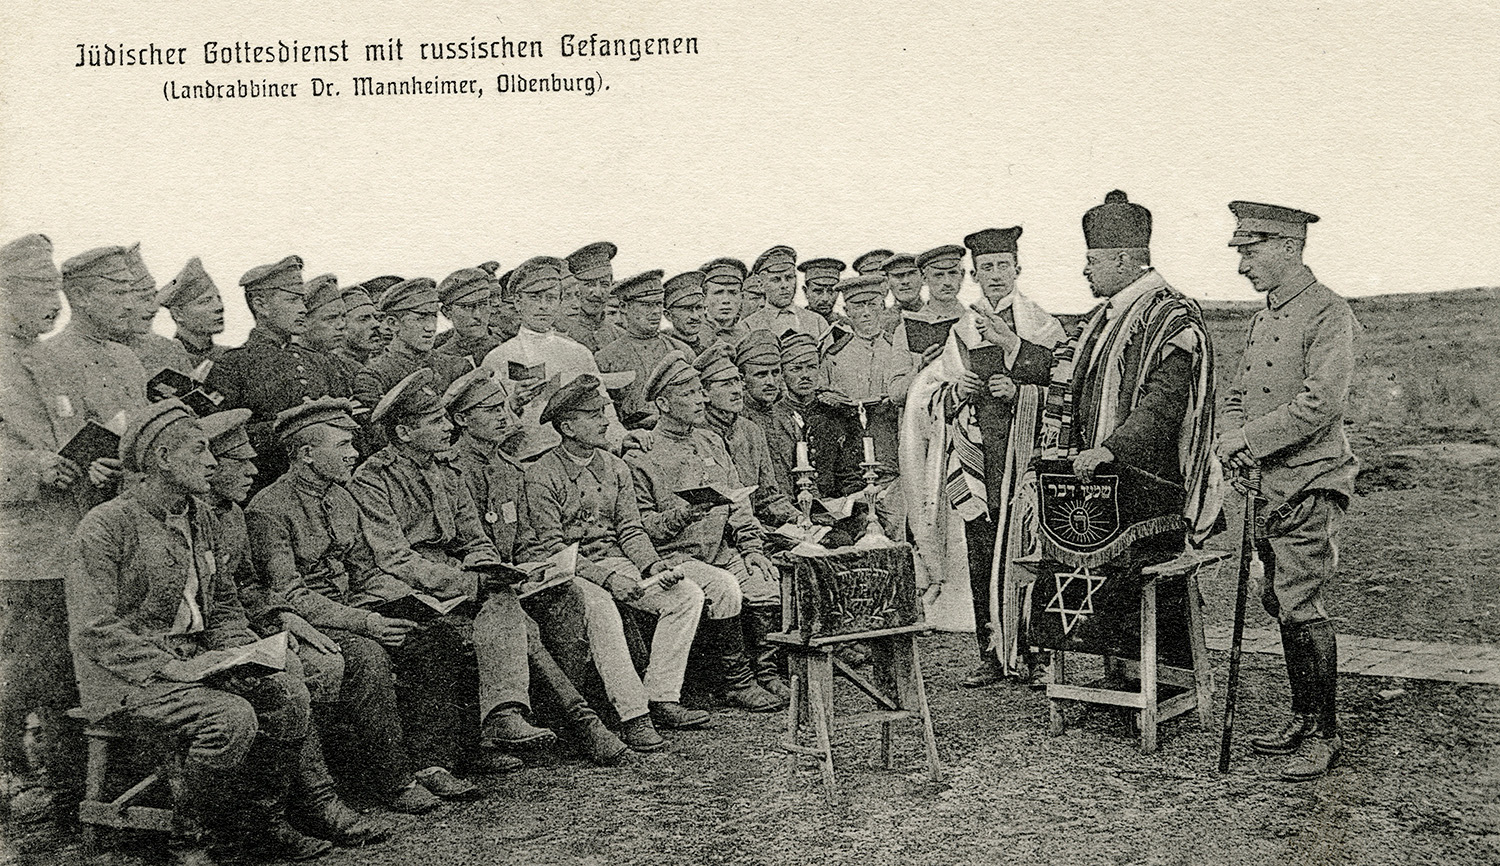 
A German rabbi leads religious services for Russian Jewish POWs during World War I. Universal History Archive/Universal Images Group via Getty Images.






